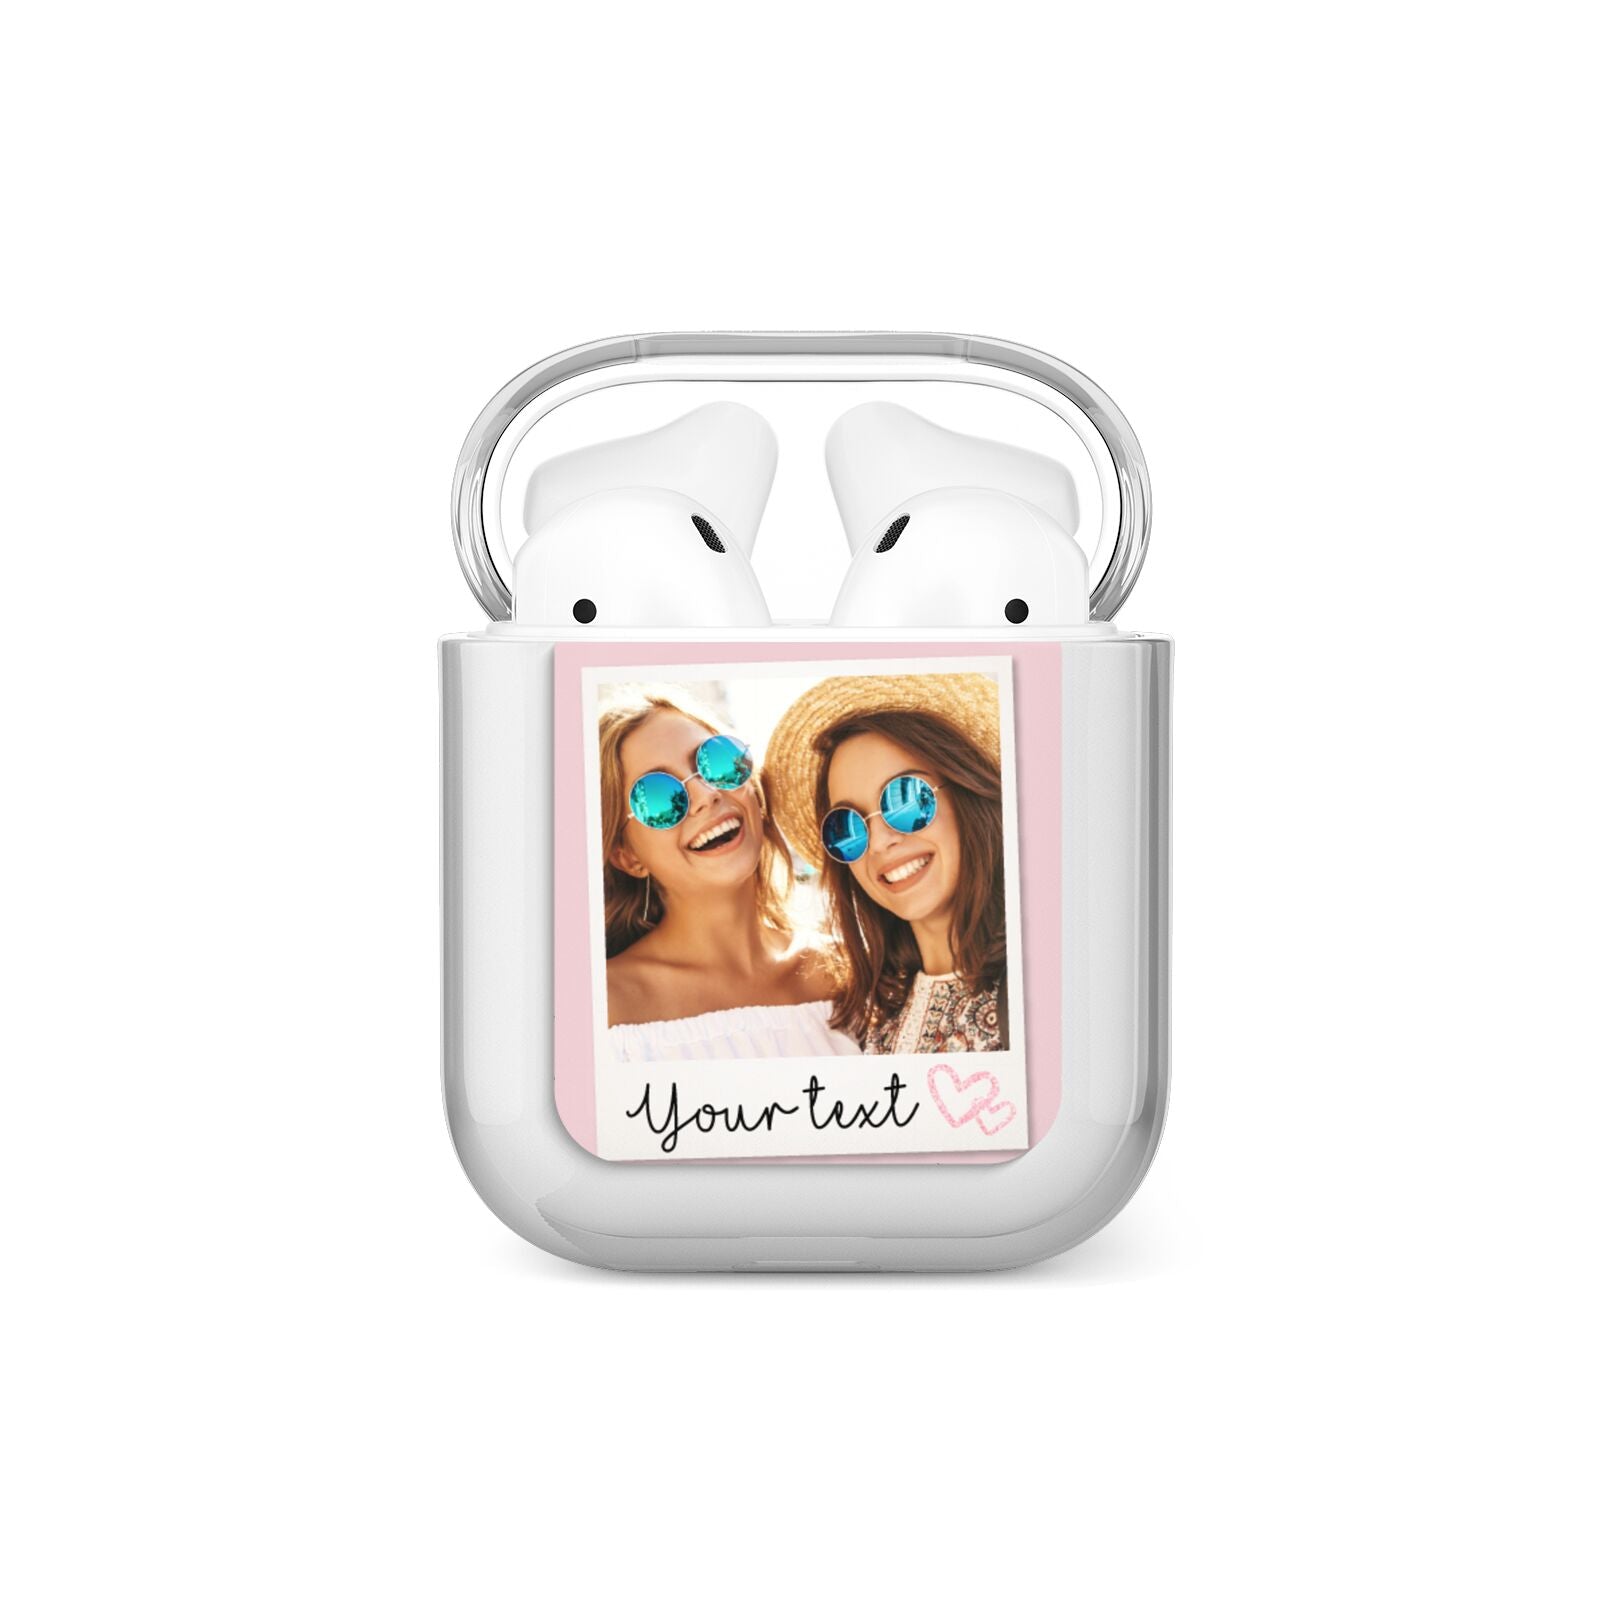 Personalised Best Friend Photo AirPods Case